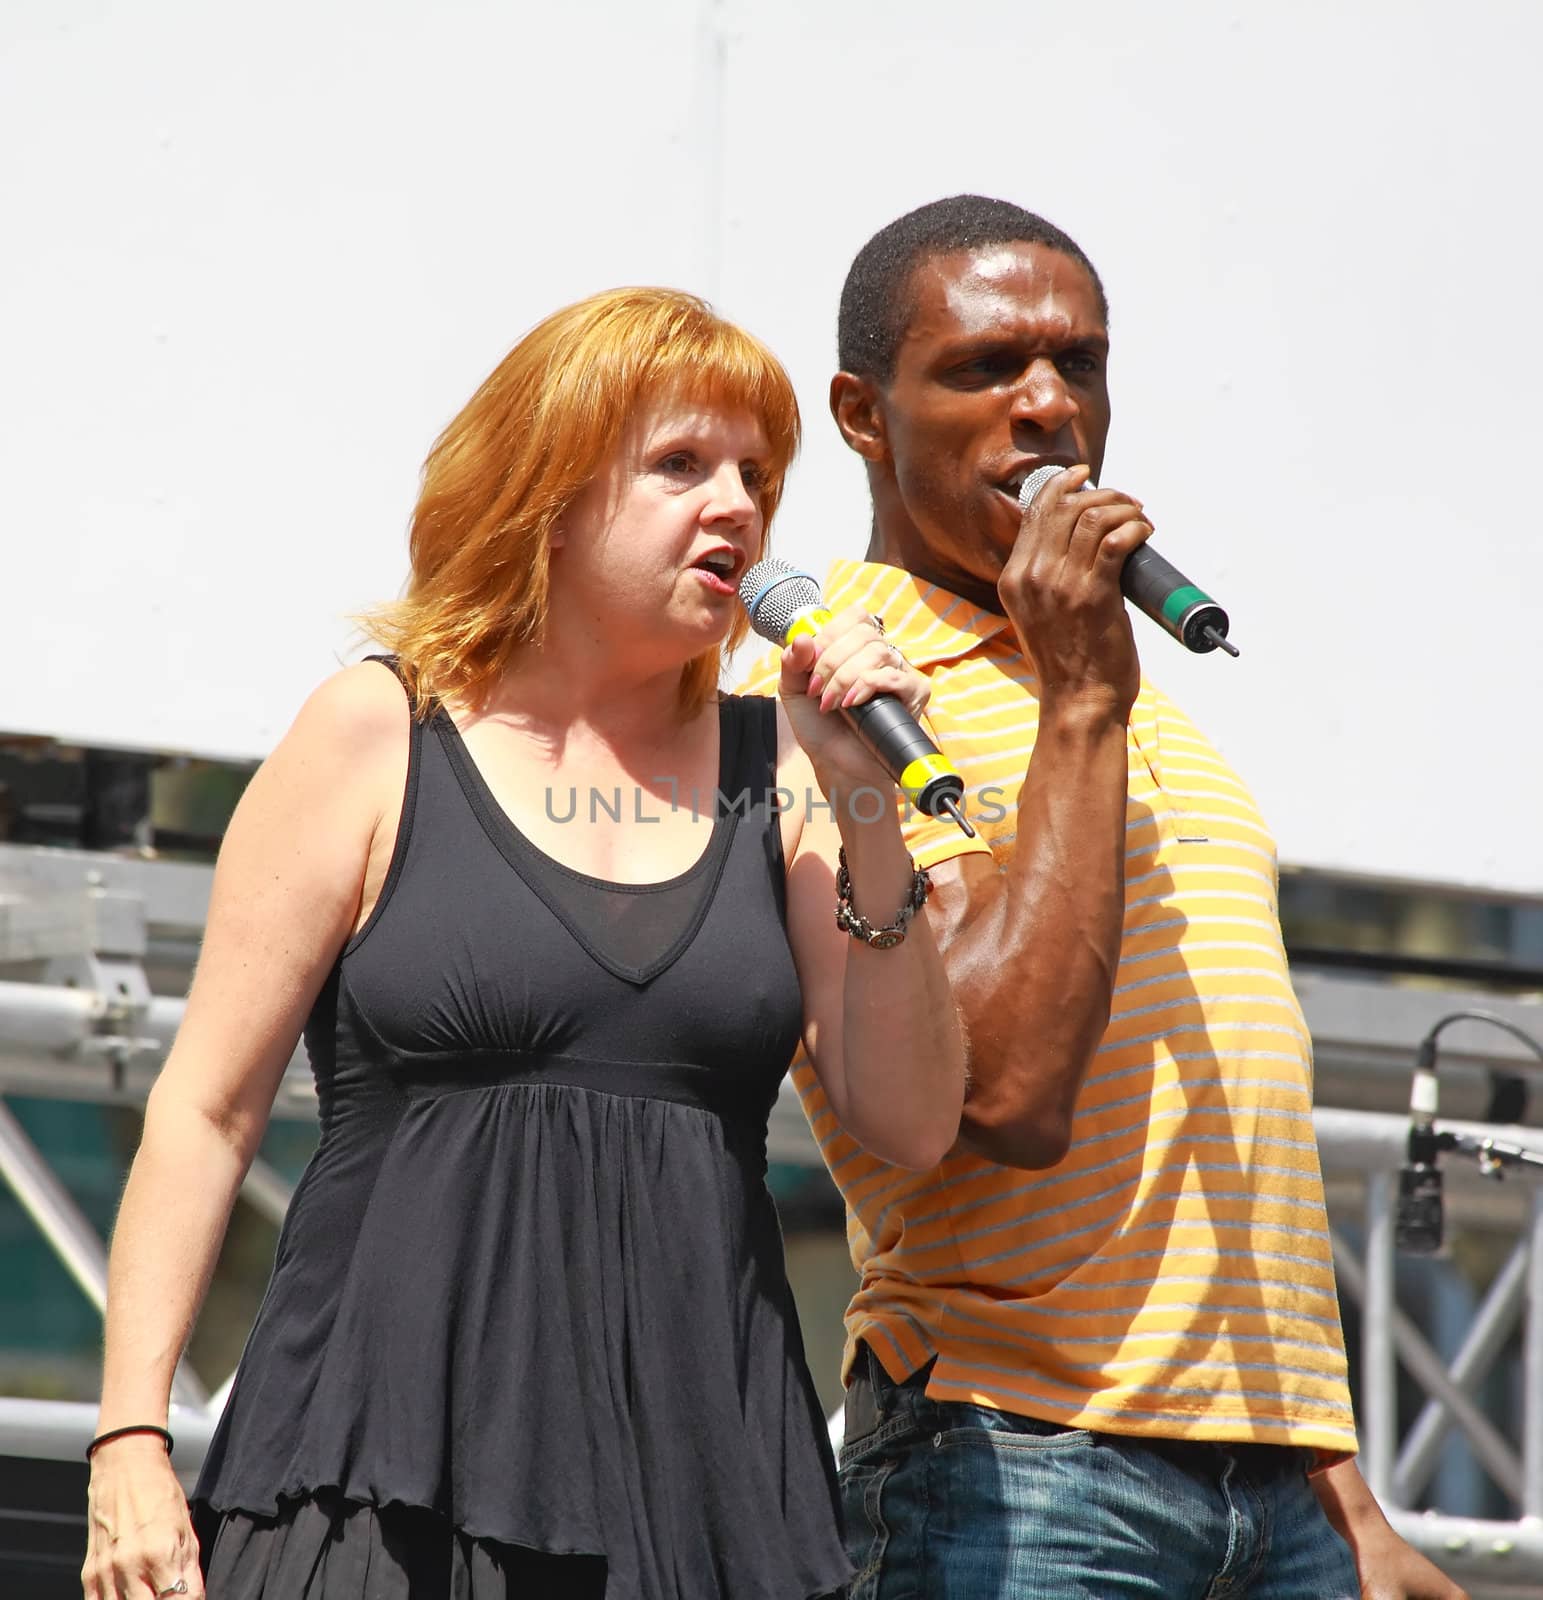 NEW YORK - AUGUST 7: Annie Golden and Andre Ward performed Xanadu at The Broadway in Bryant Park in NYC - a free public event on August 7, 2008   